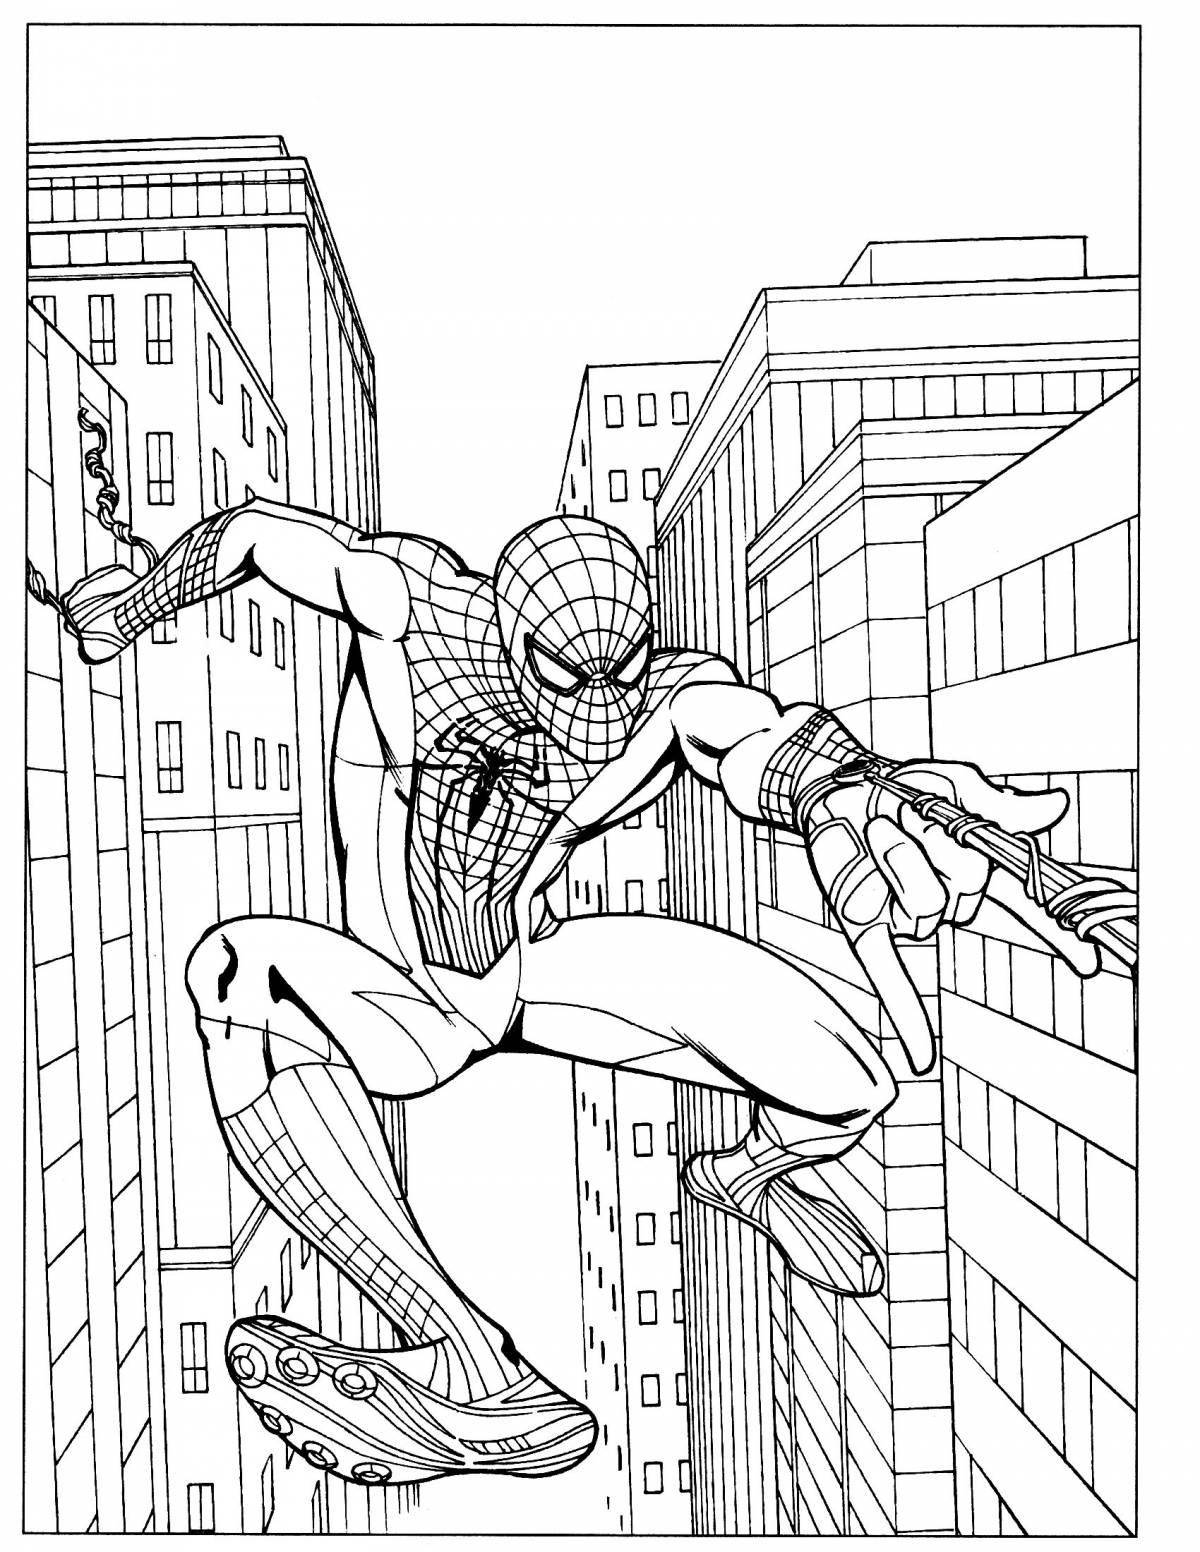 Awesome spiderman coloring page